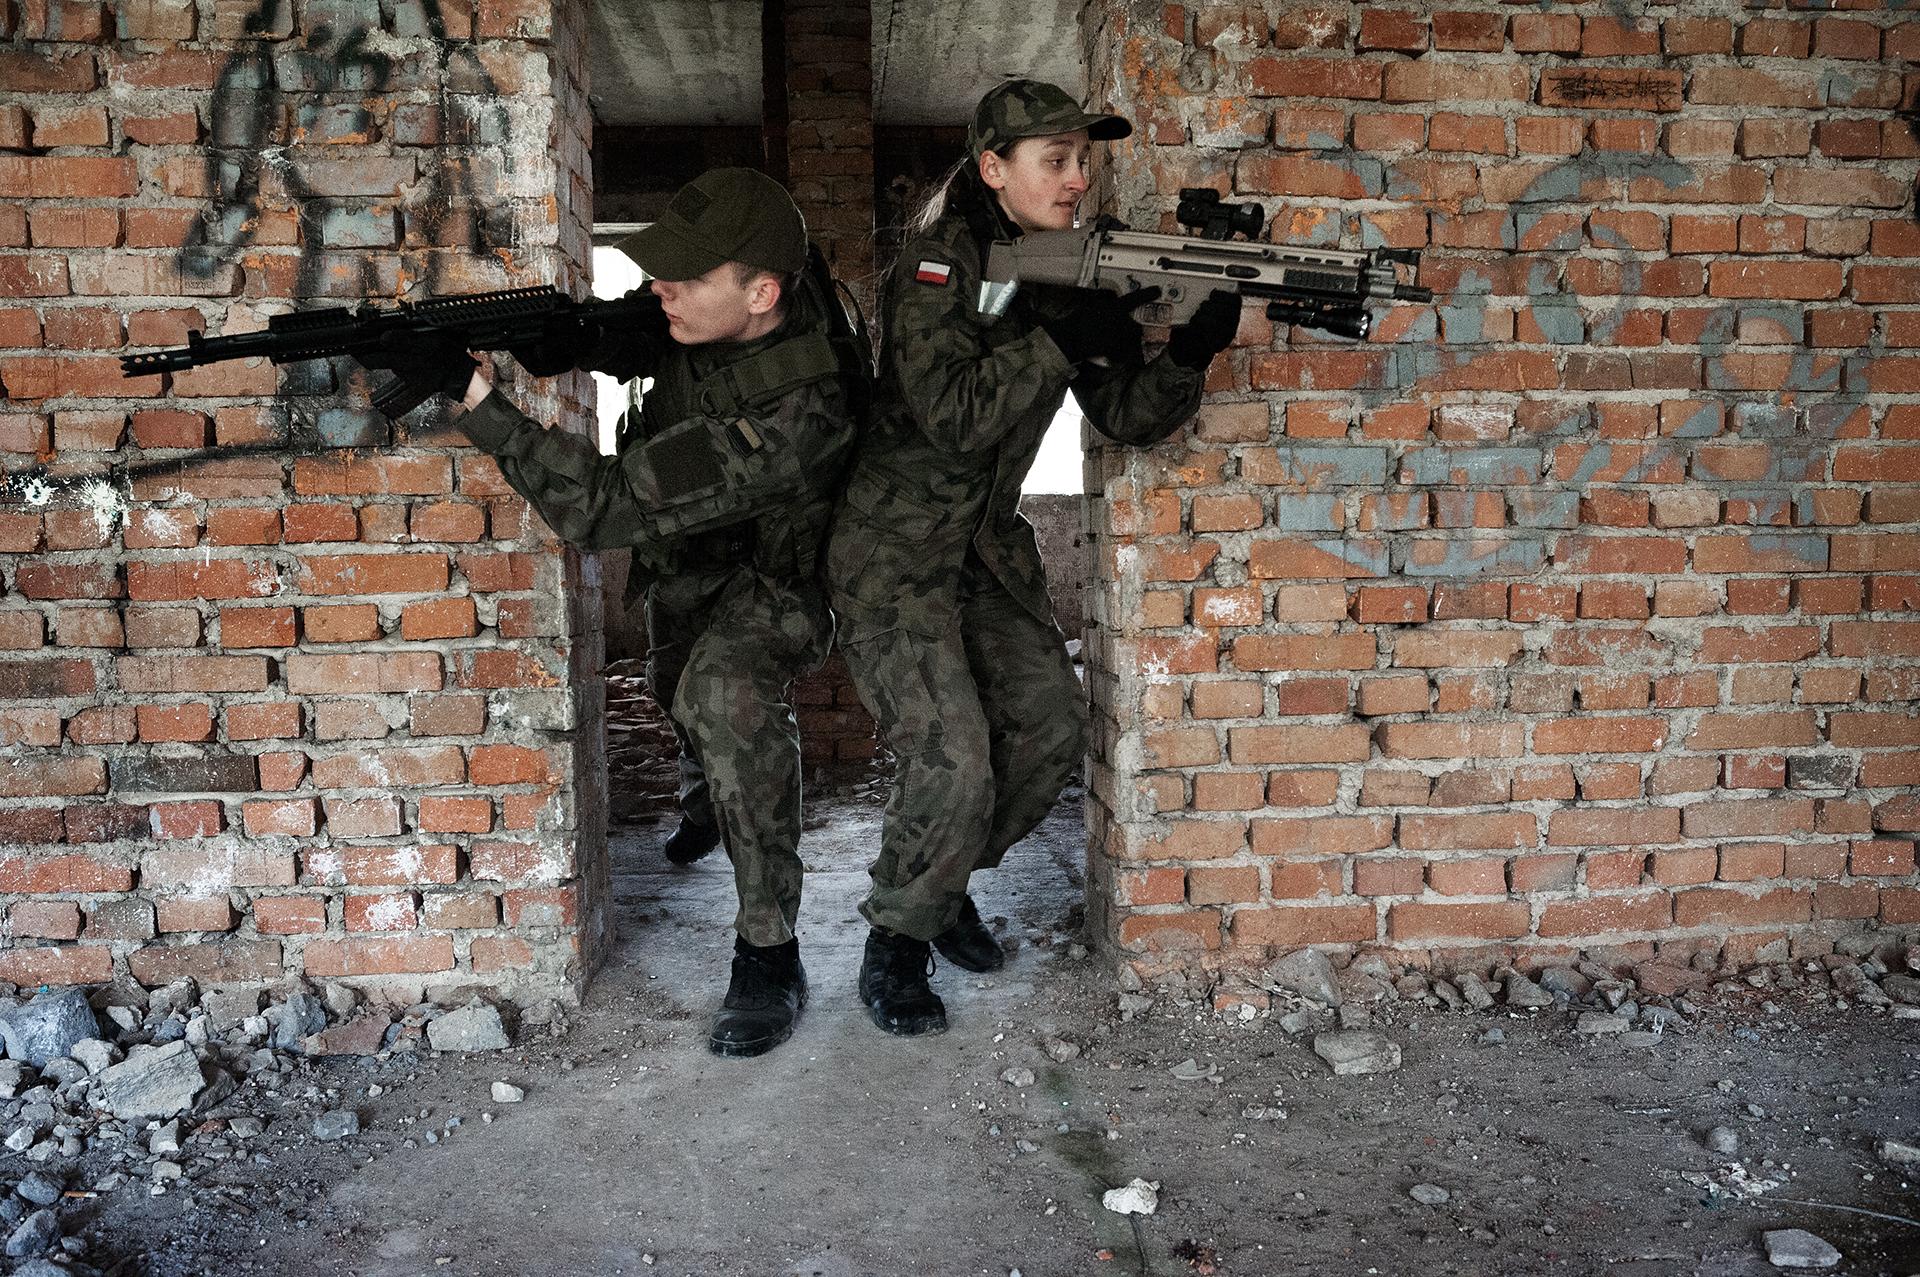  Students (16-19 years old) learn combat tactics in urban areas under the supervision of a...